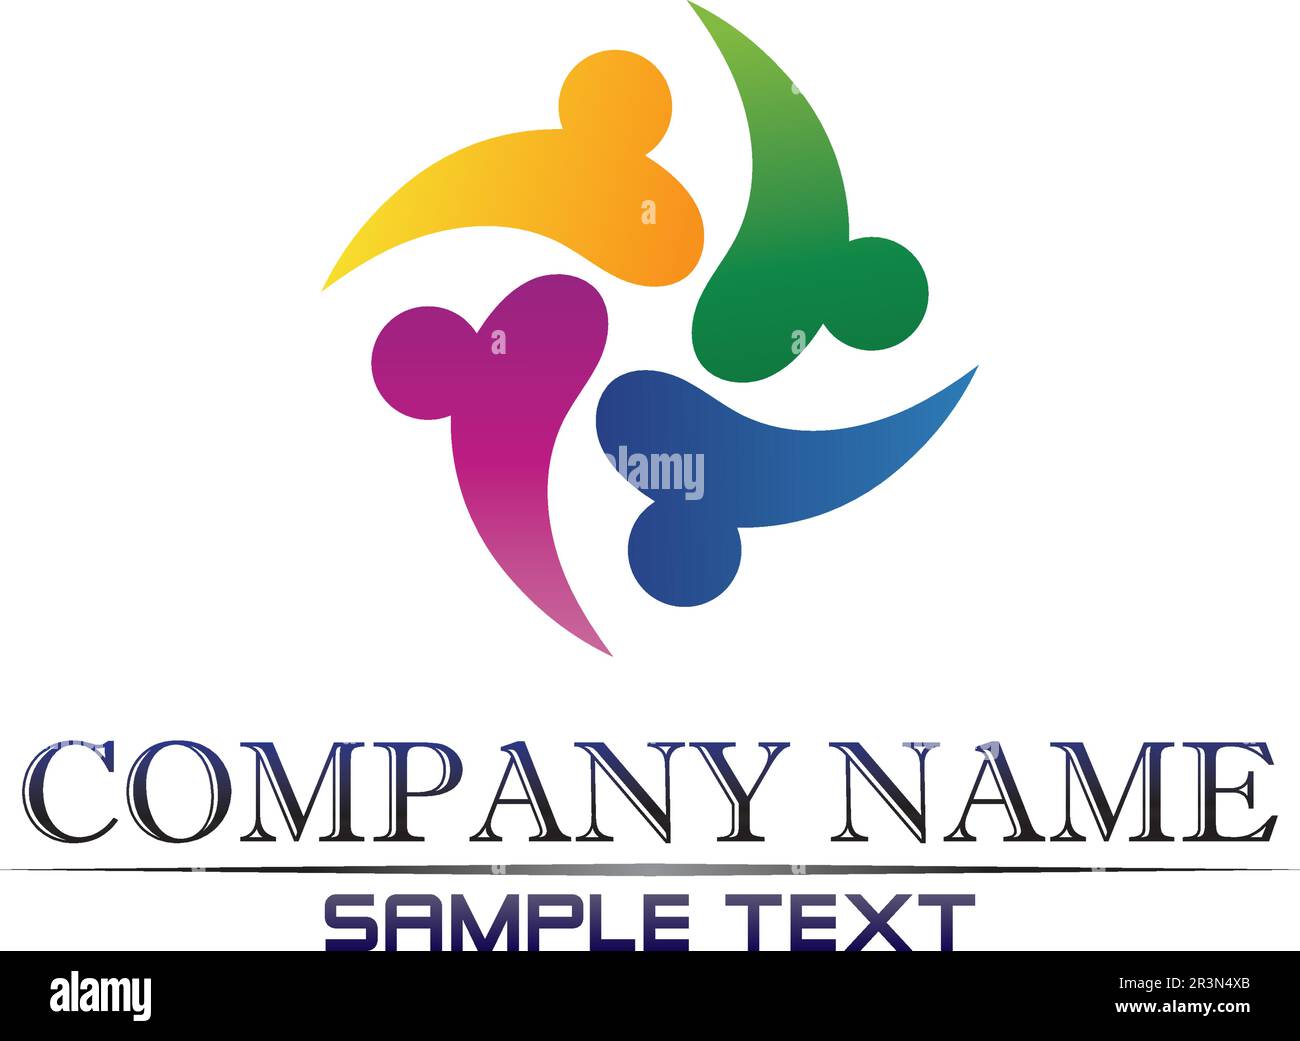 Community people care logo and symbols template Stock Vector